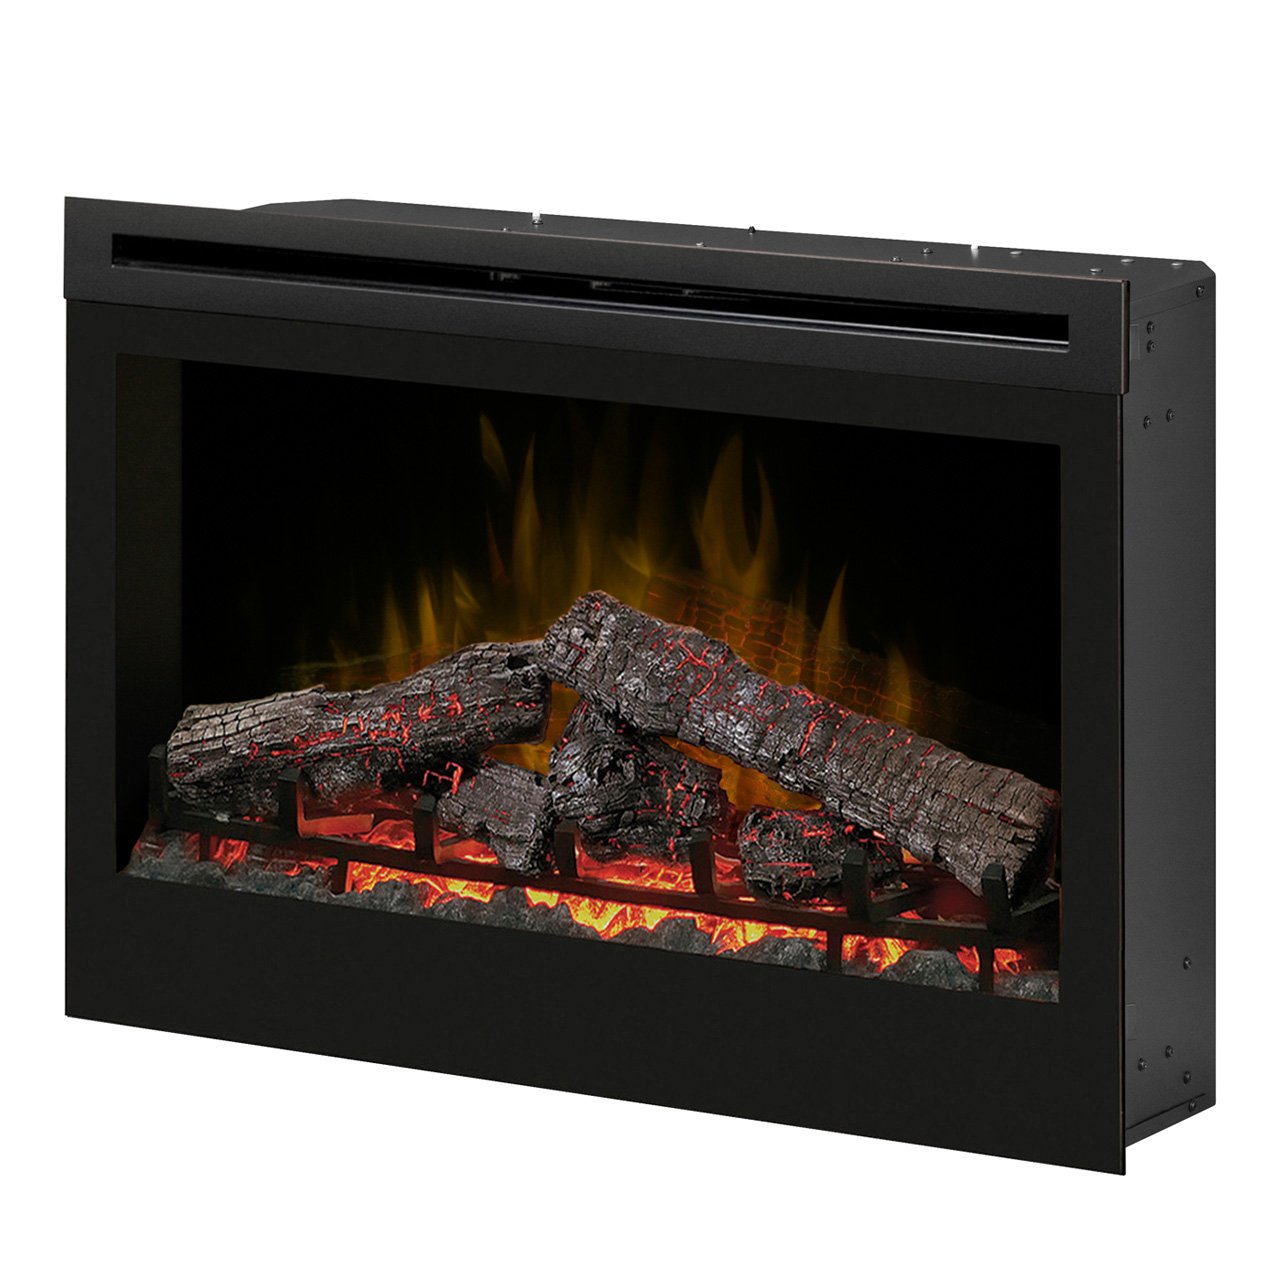 Amazon Fireplace Mantels New Dimplex Df3033st 33 Inch Self Trimming Electric Fireplace Insert